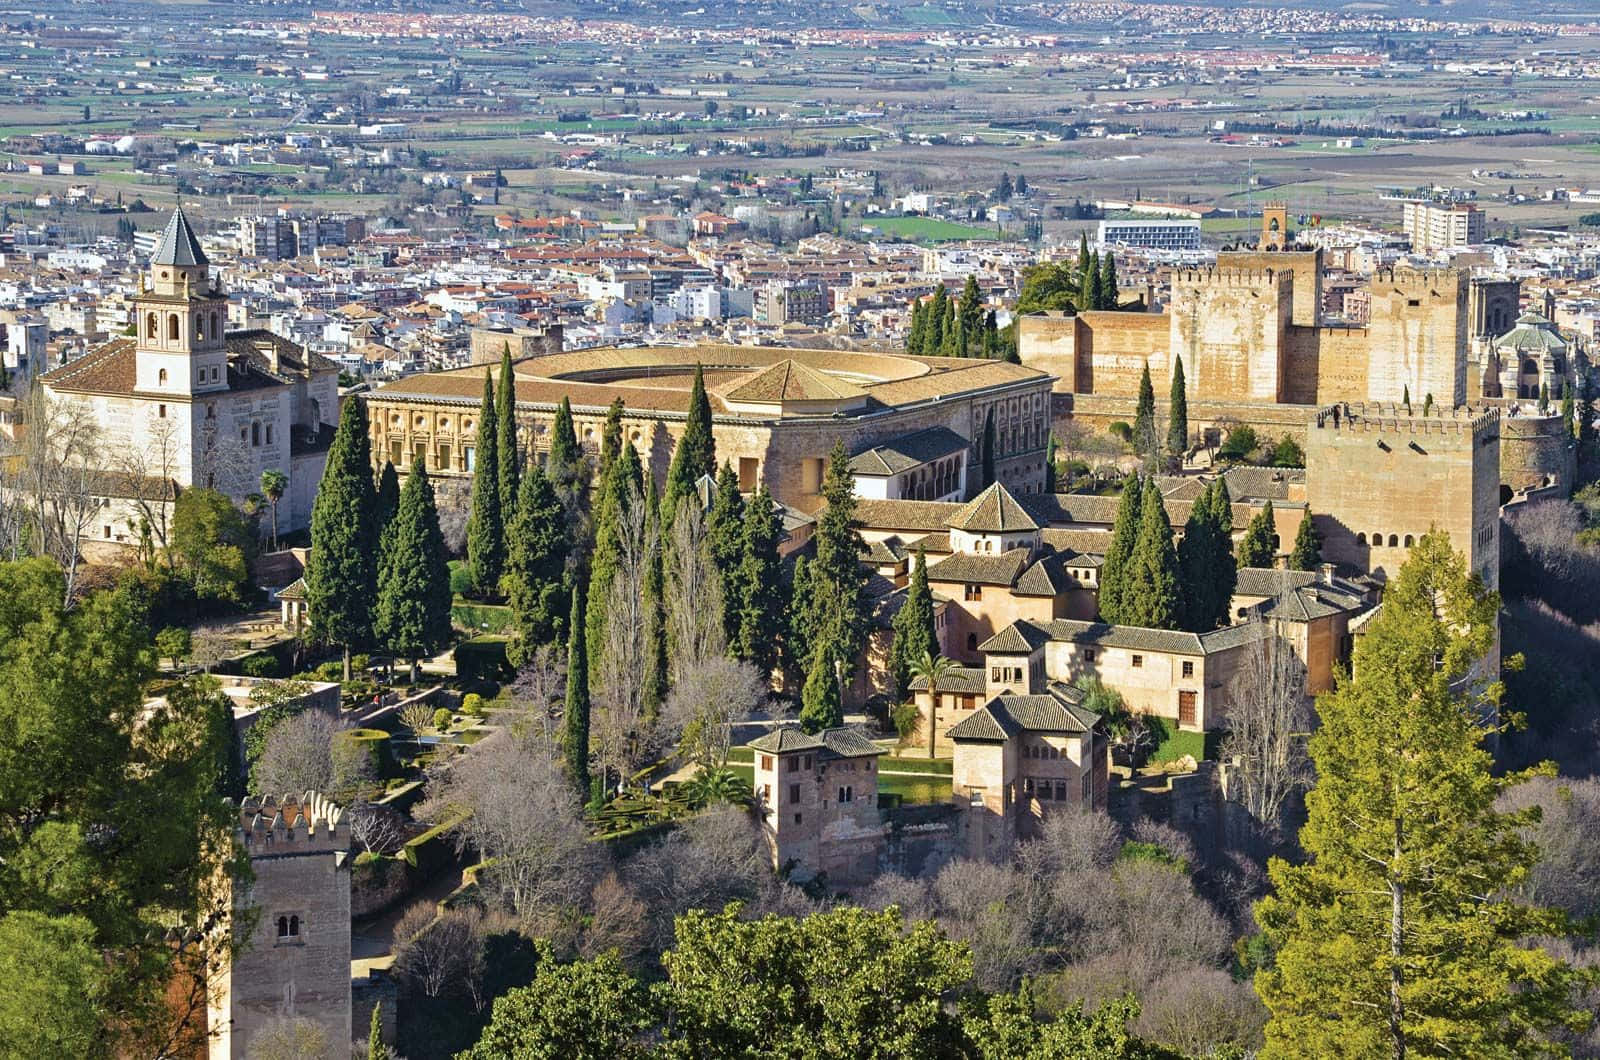 Explore the culture, beauty and customs of Spain